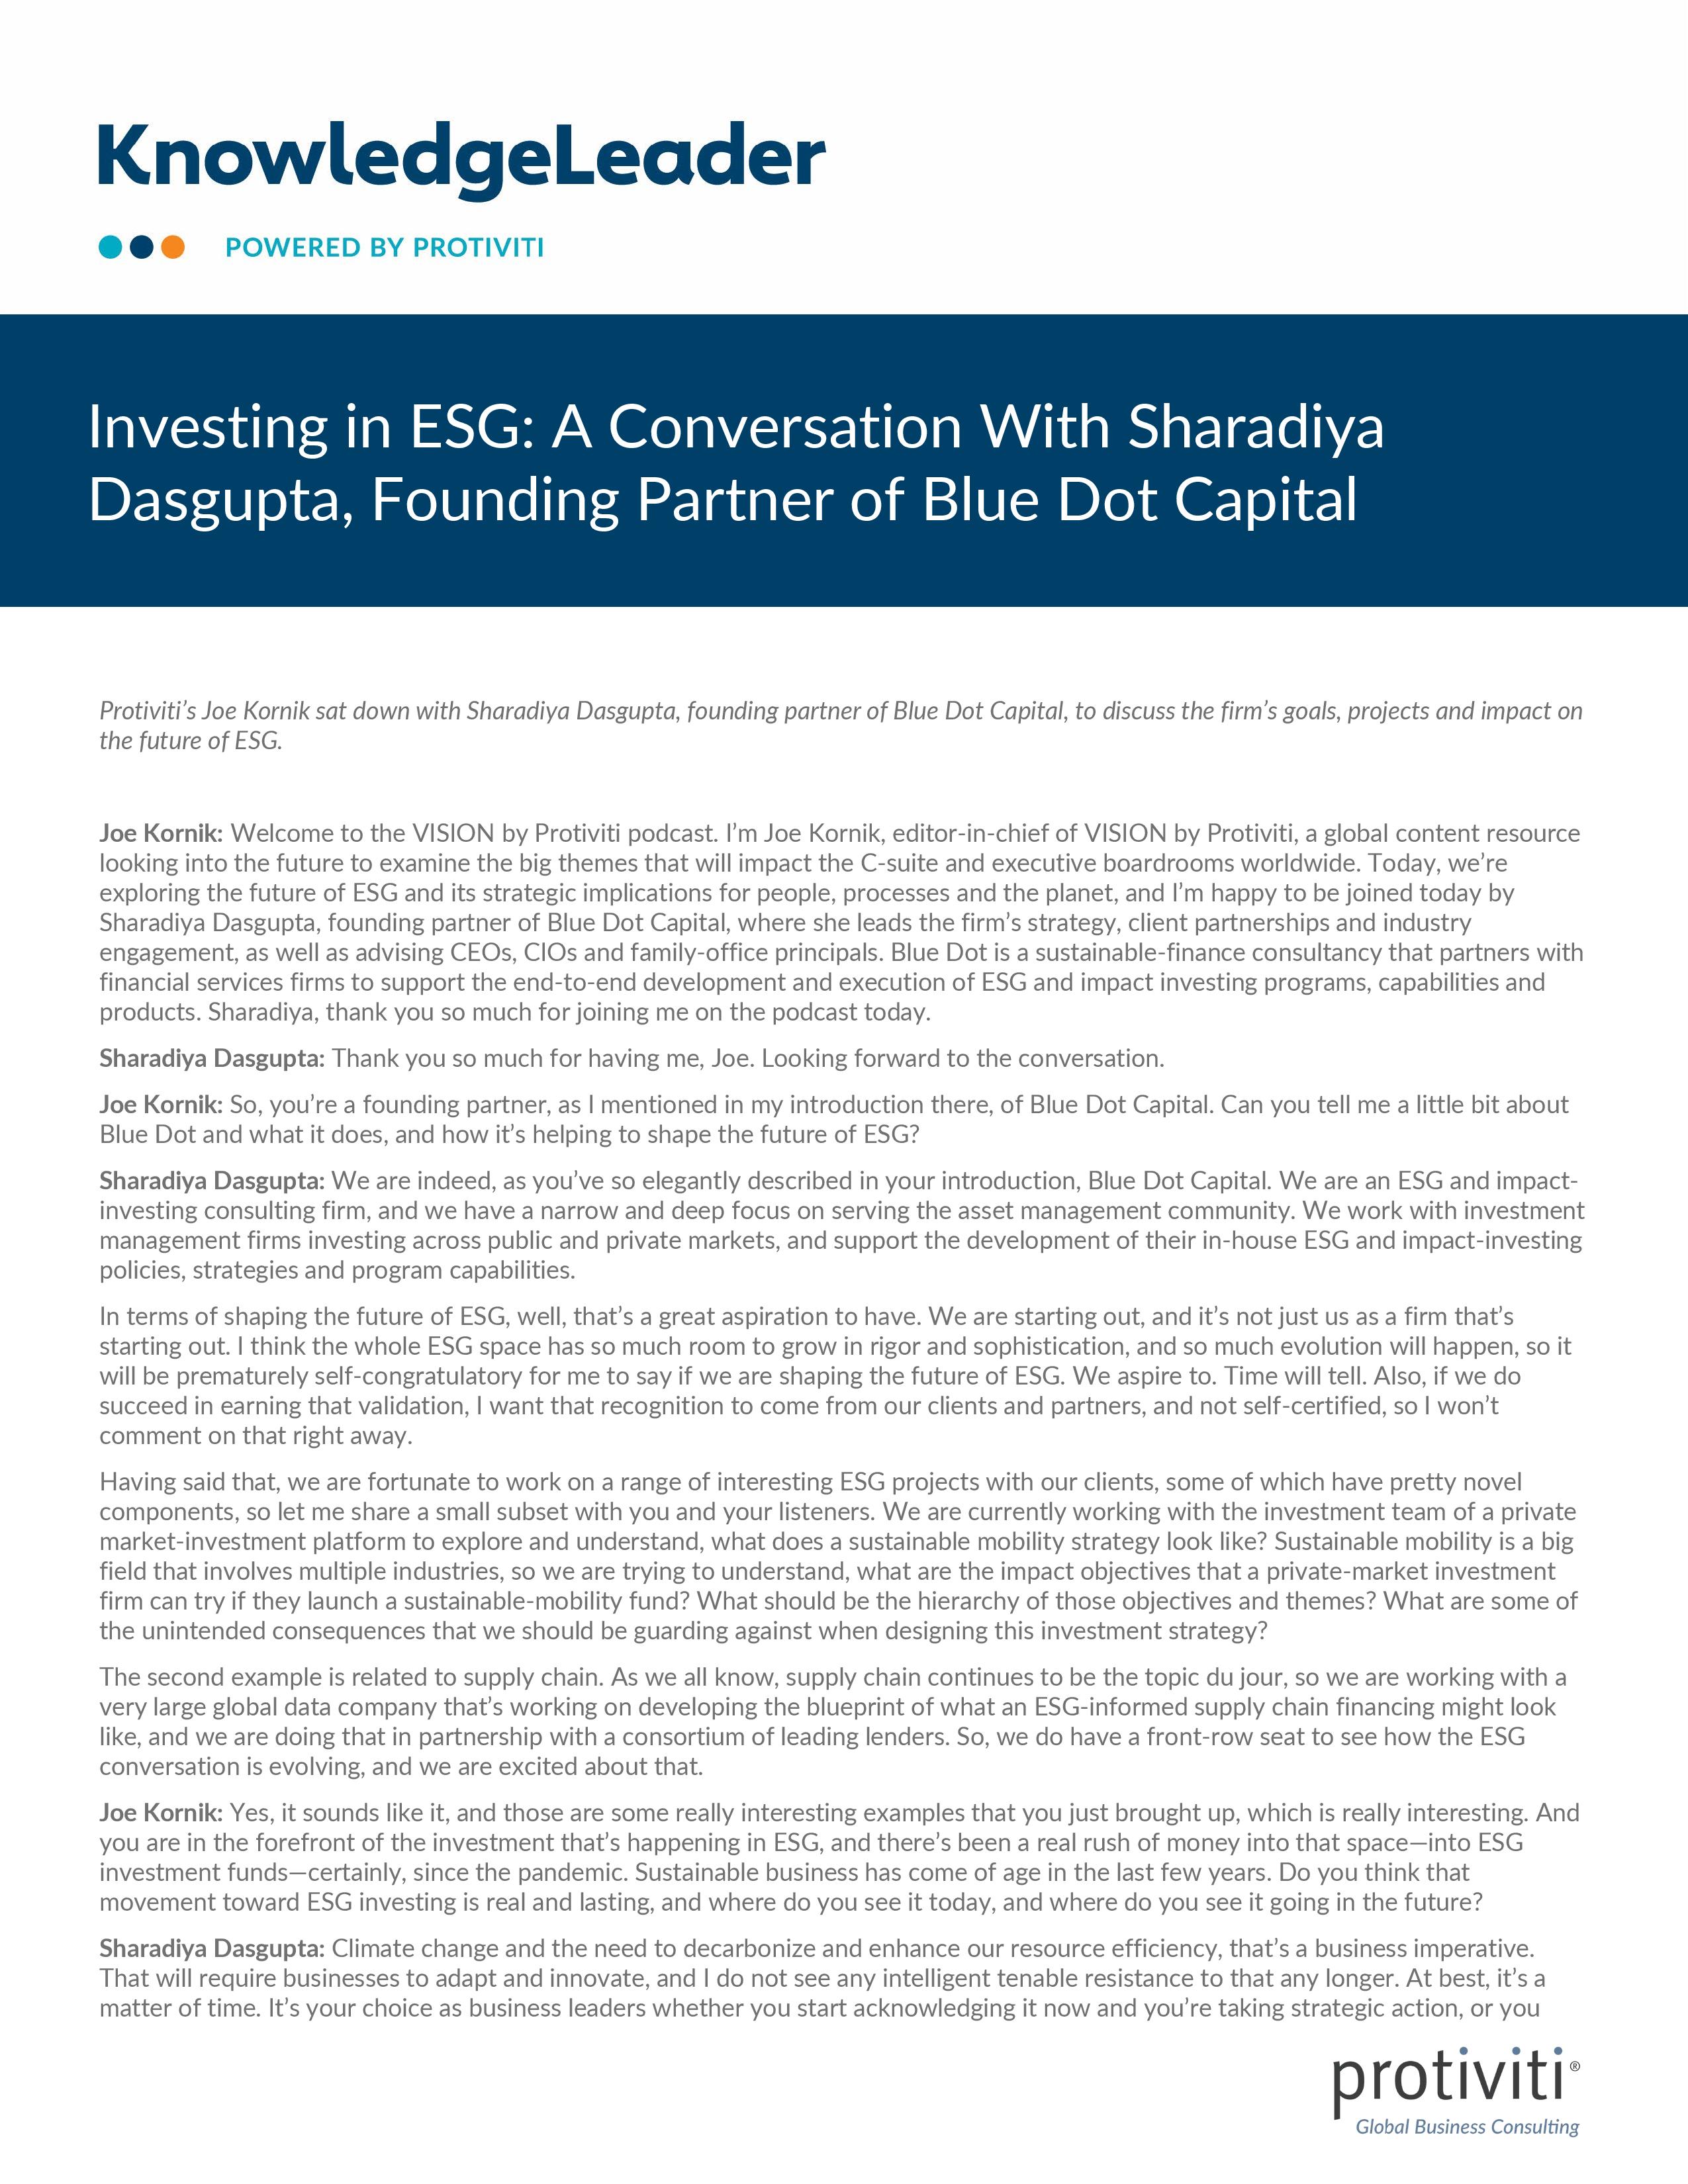 Screenshot of the First Page of Investing in ESG A Conversation With Sharadiya Dasgupta, Founding Partner of Blue Dot Capital